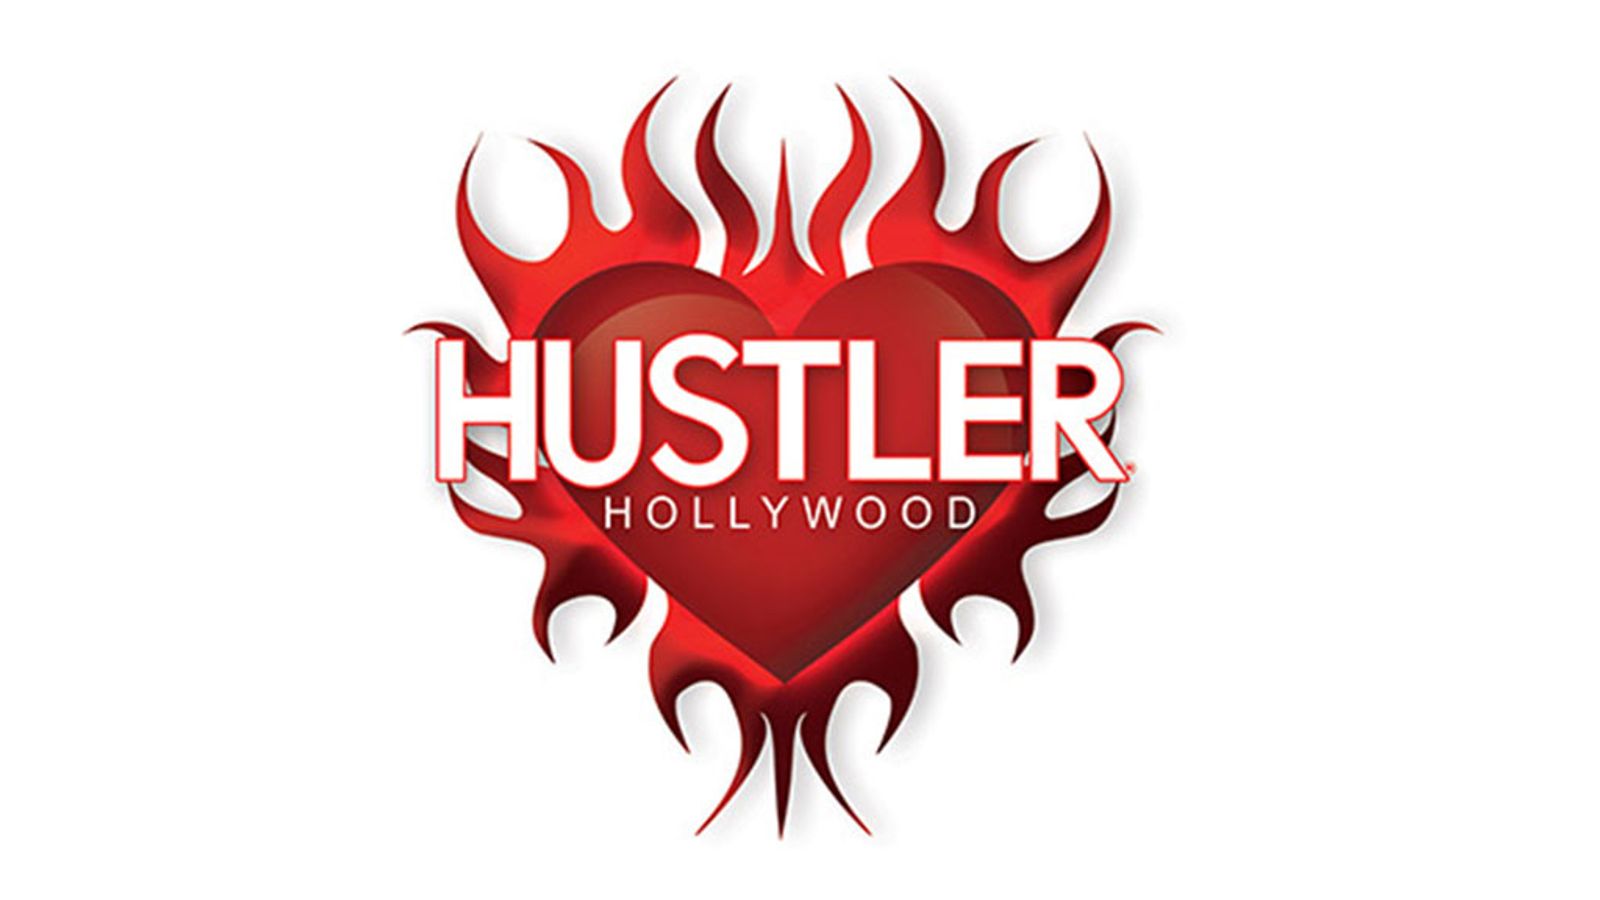 Hustler Hollywood Now Offering Curbside Pick-Up In Four CA Cities